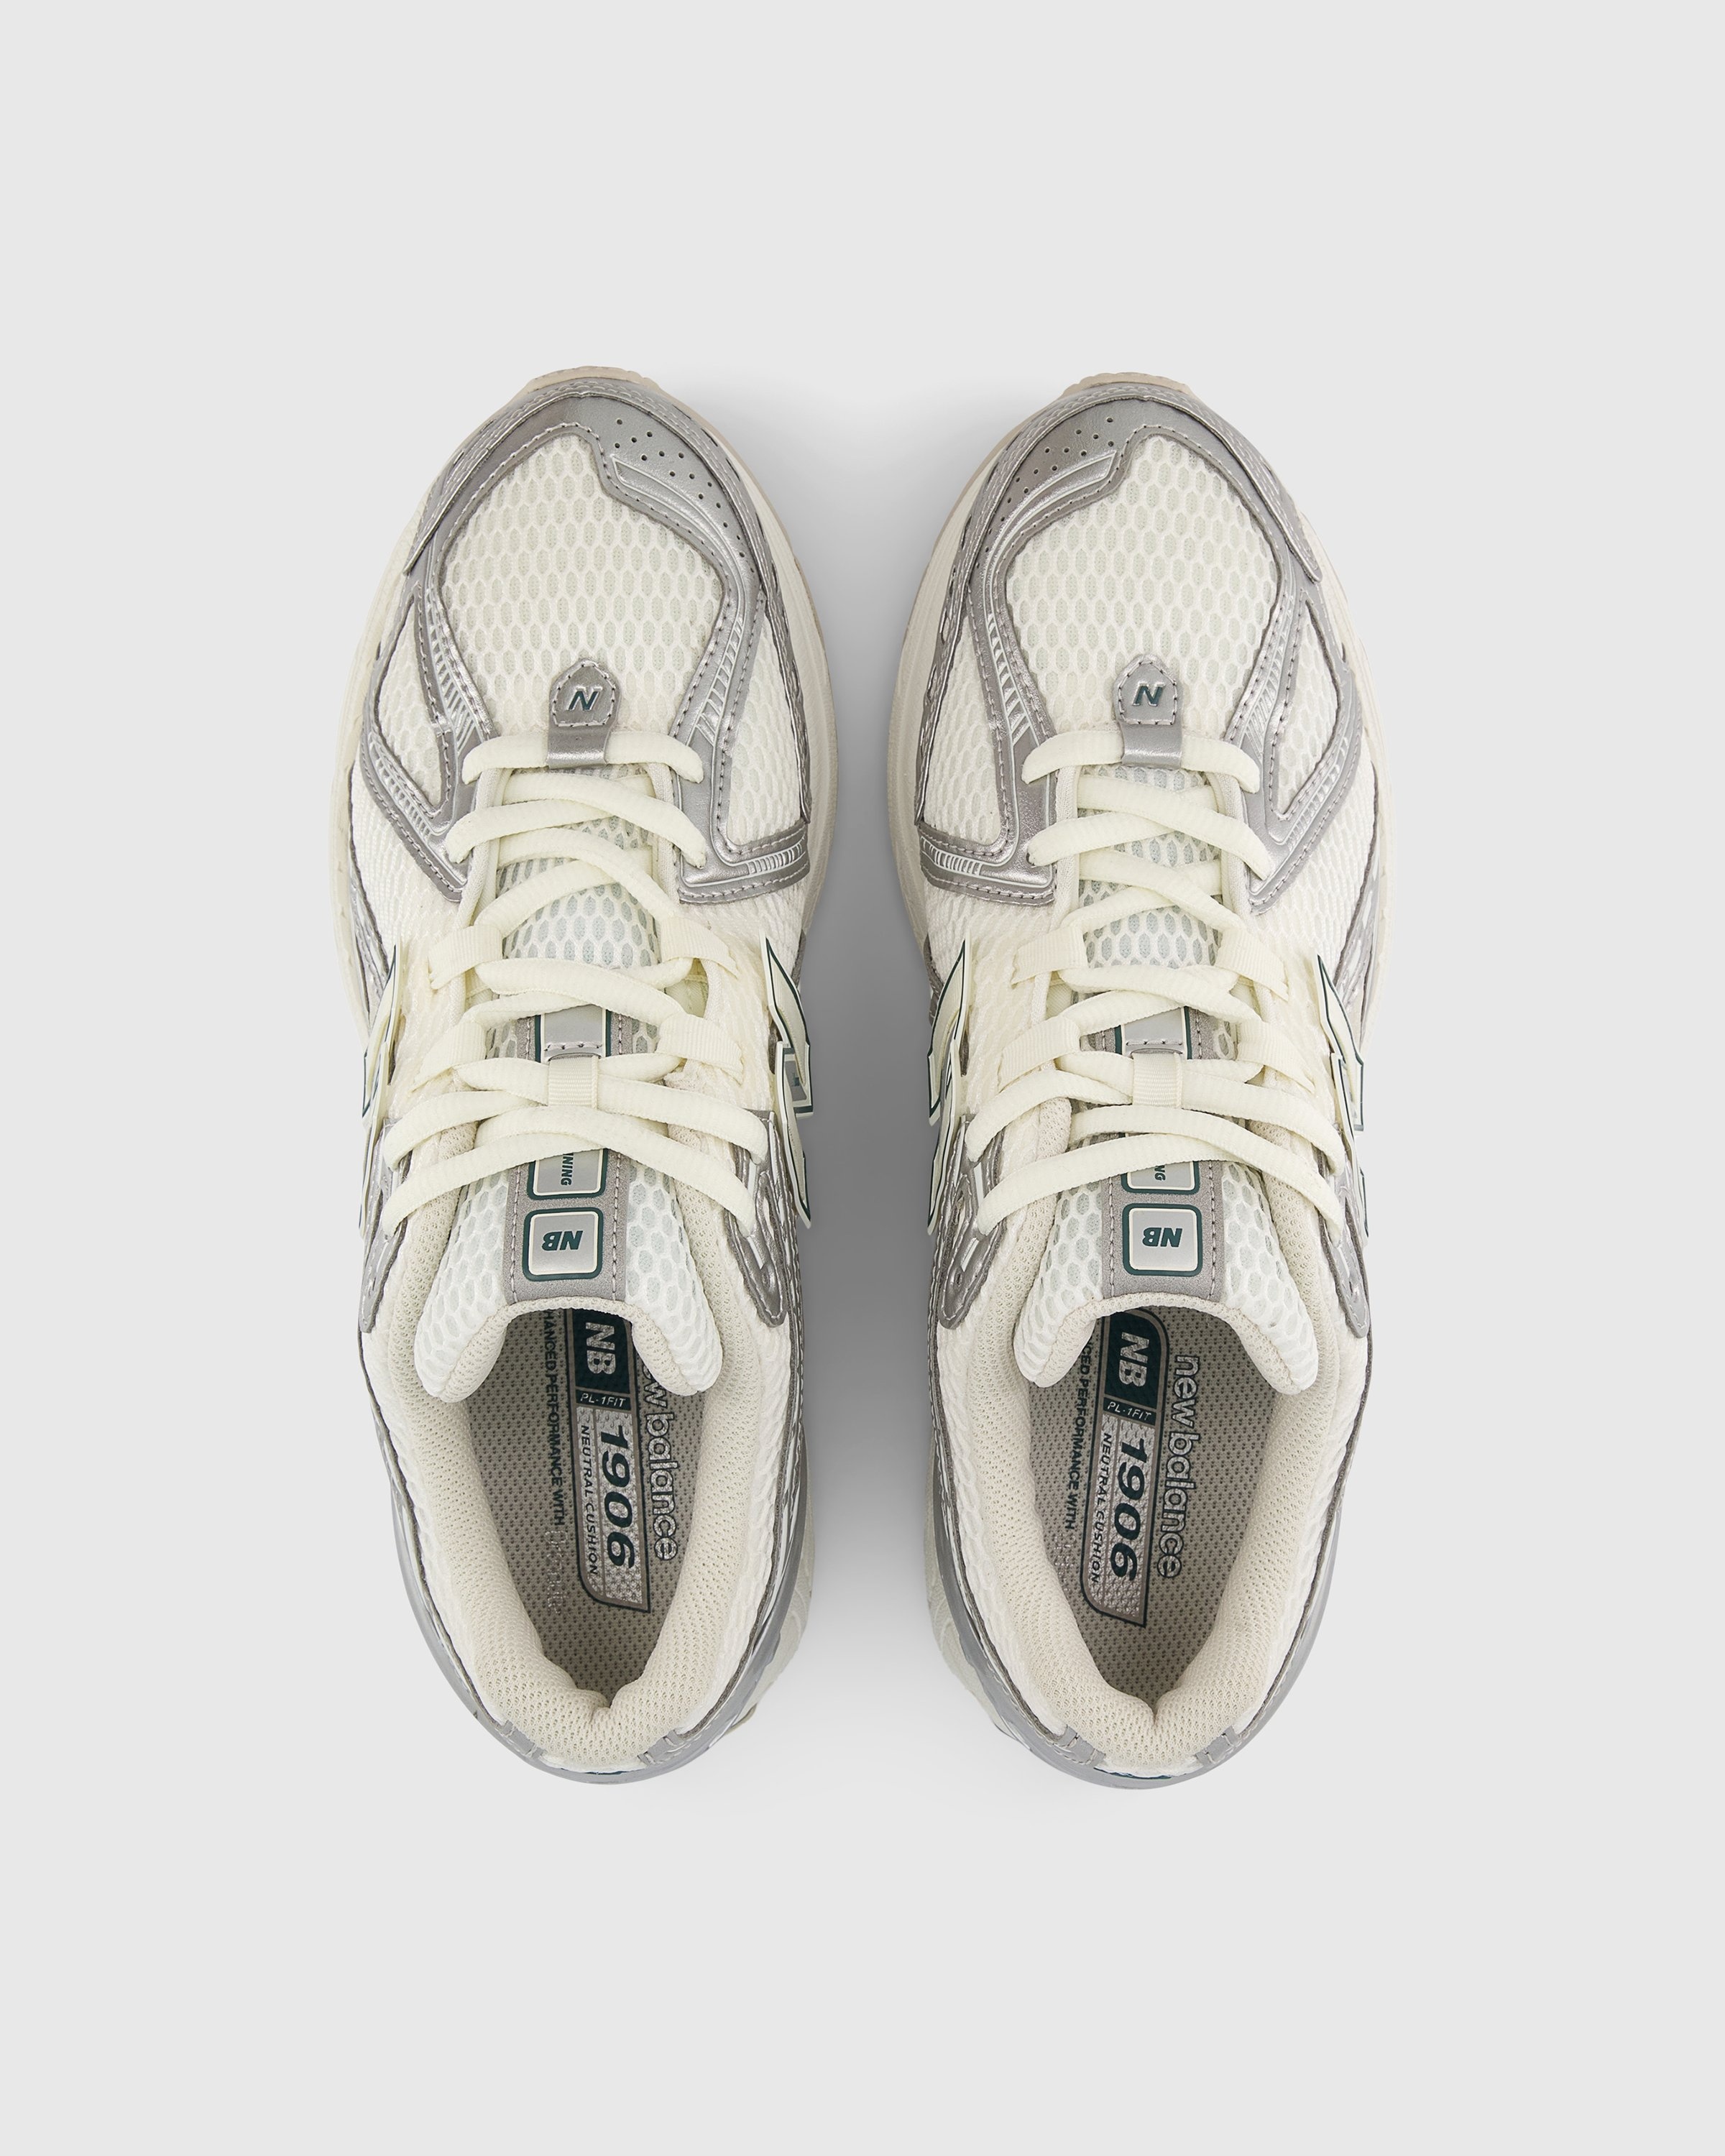 New Balance – 1906 REE Silver Metallic - Low Top Sneakers - Silver - Image 5